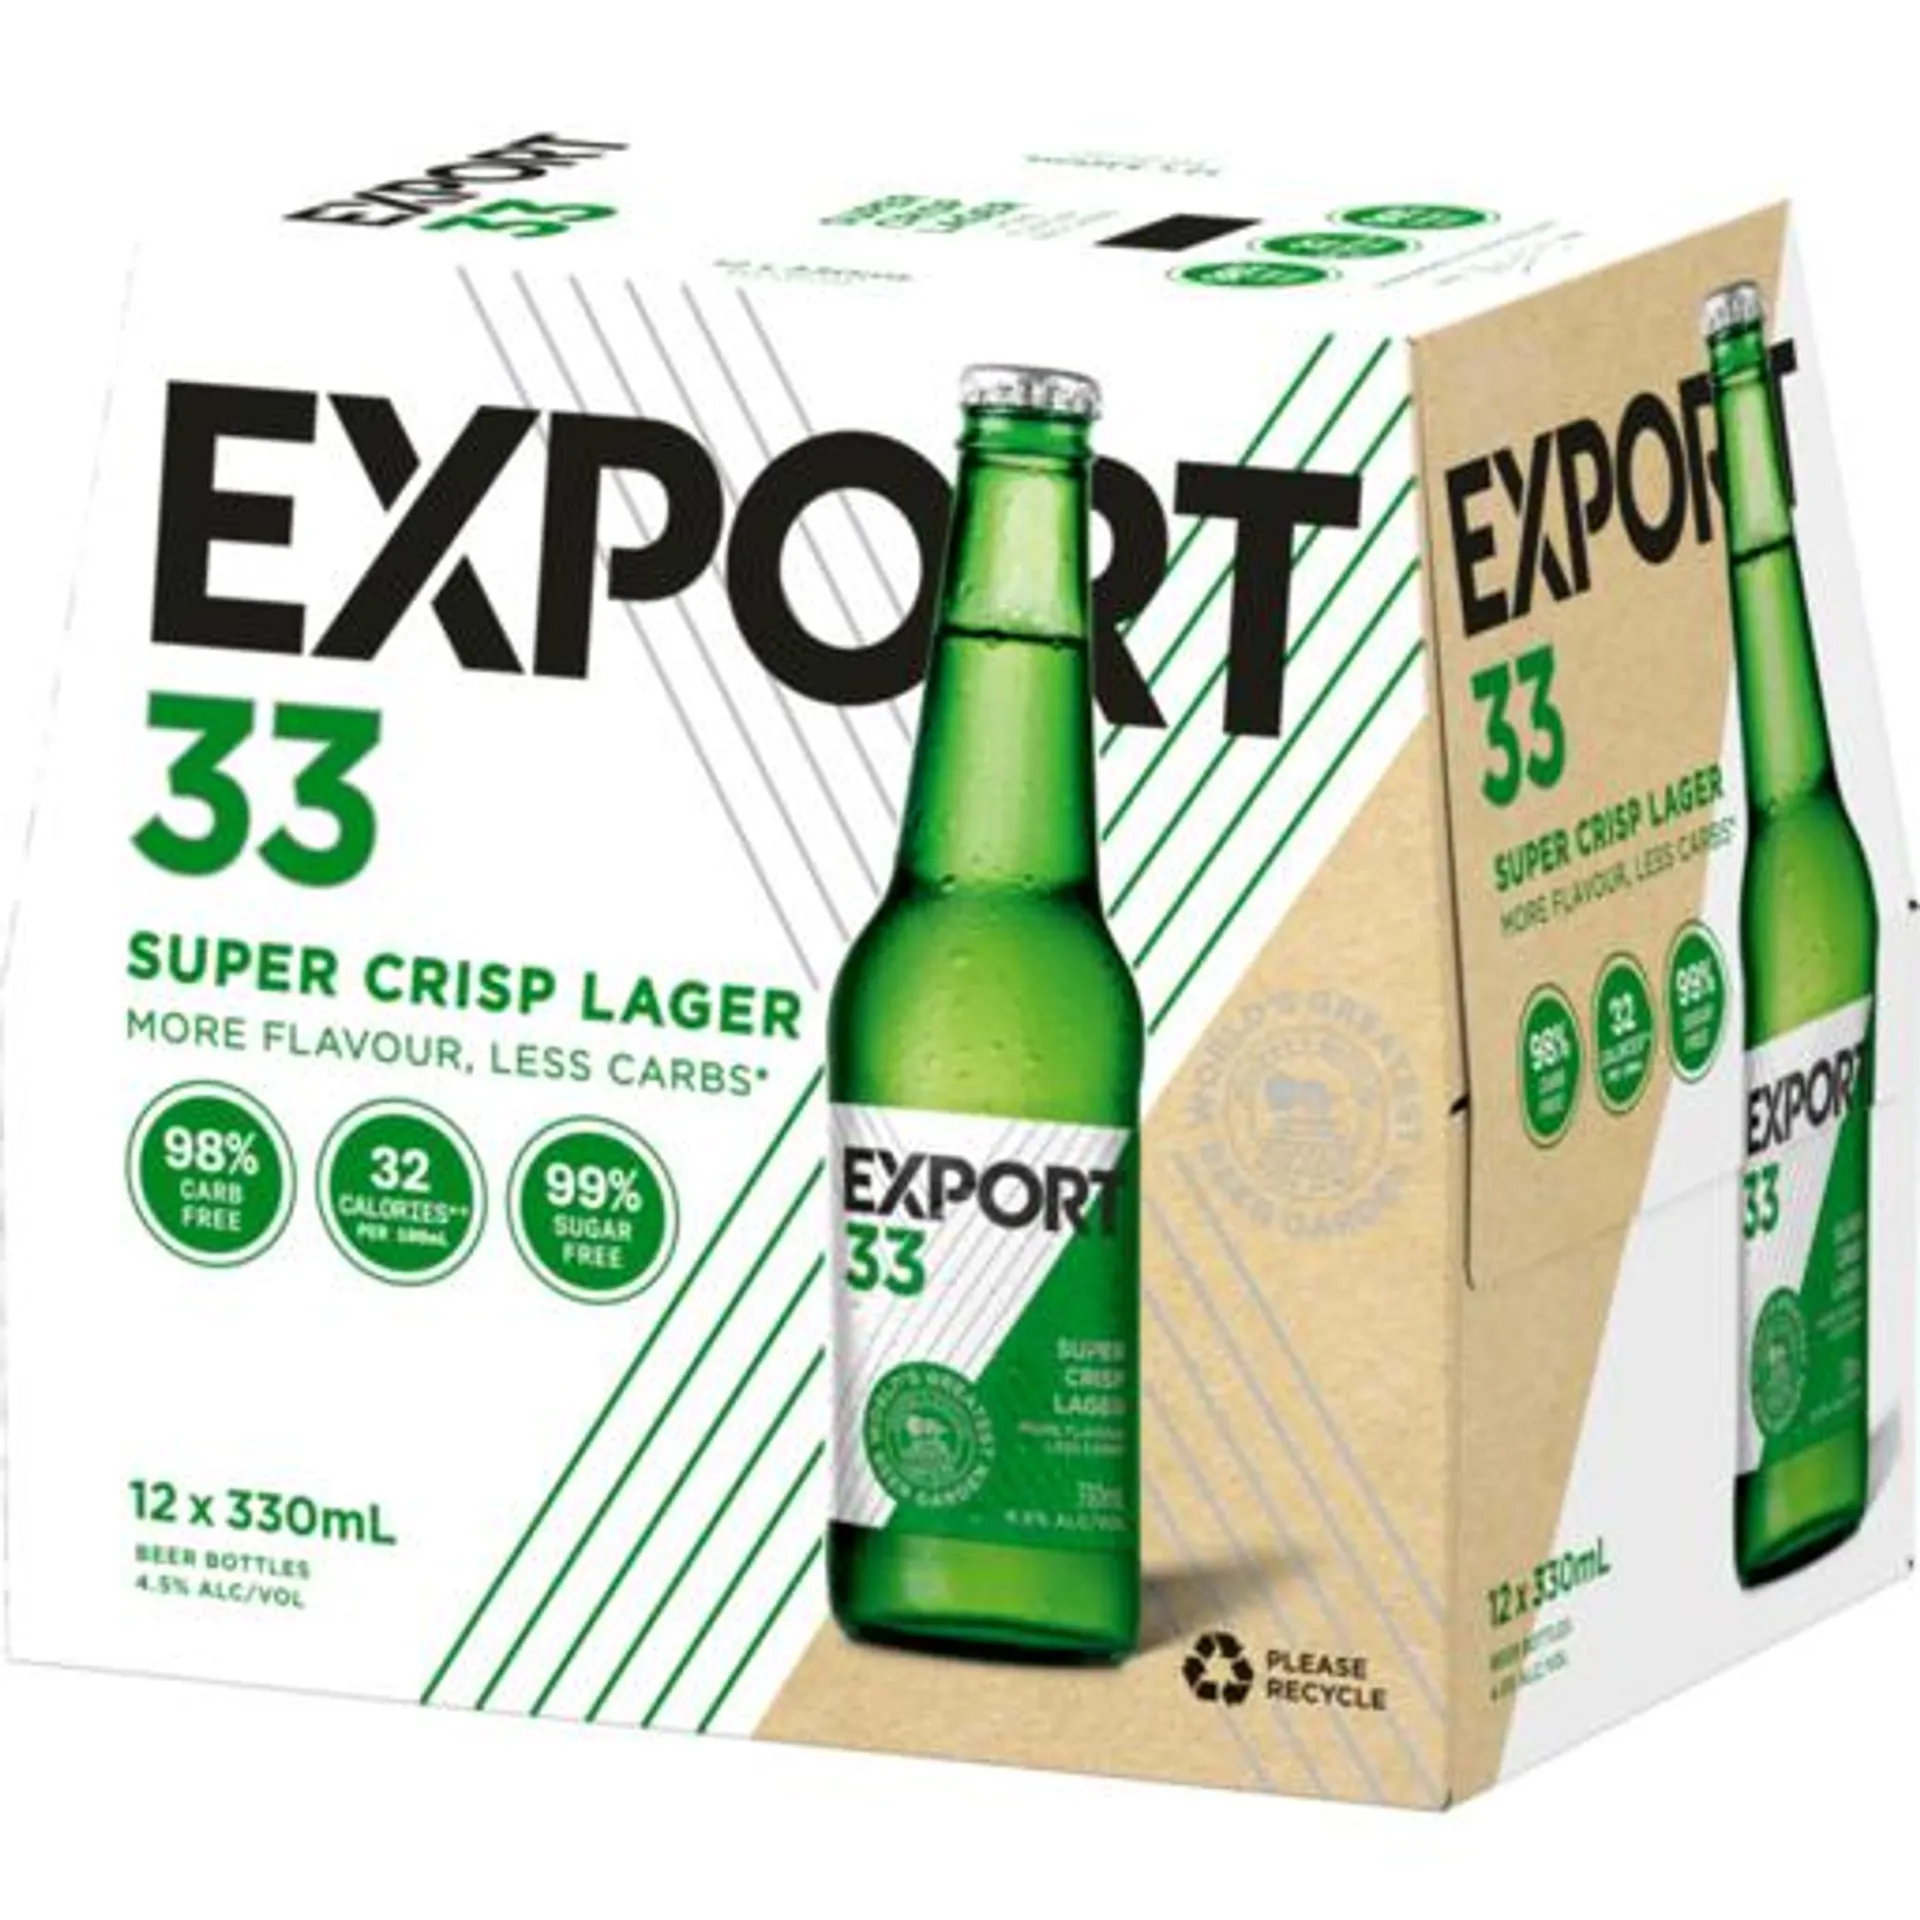 Export 33 Low Carb Bottles 12 Pack